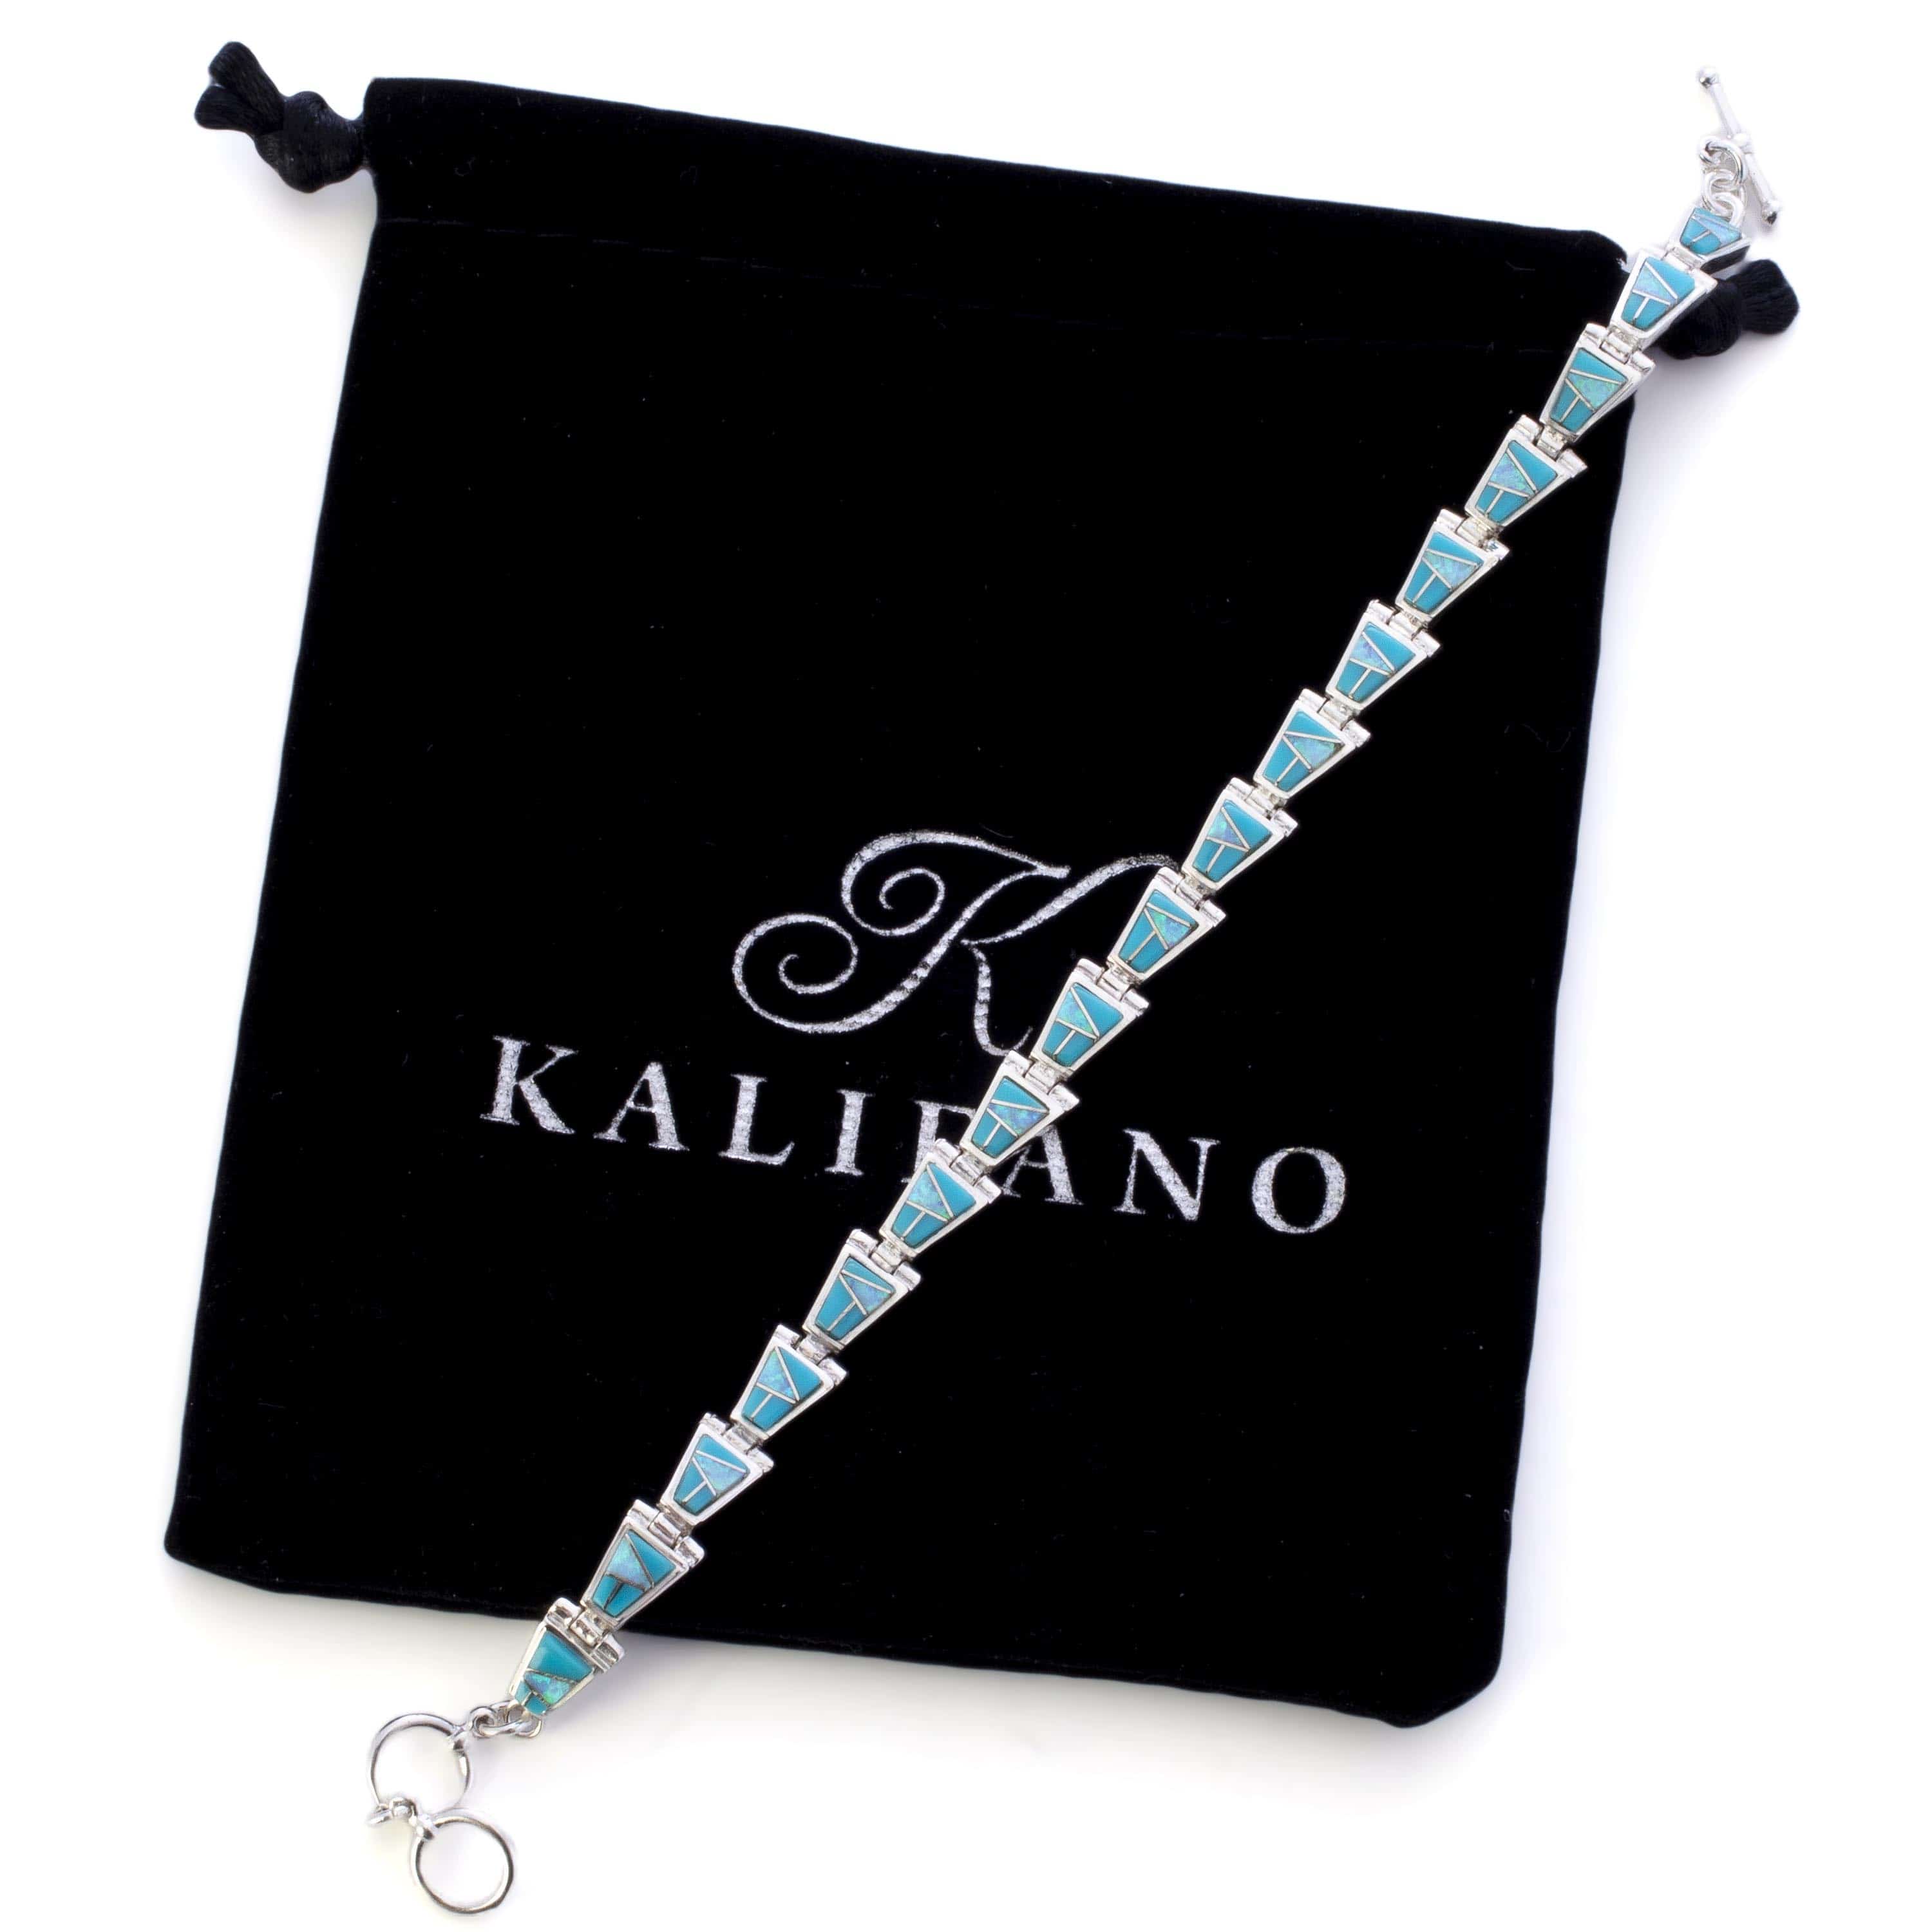 Kalifano Southwest Silver Jewelry Turquoise 925 Sterling Silver Bracelet USA Handmade with Opal Accent NMB.0543.TQ